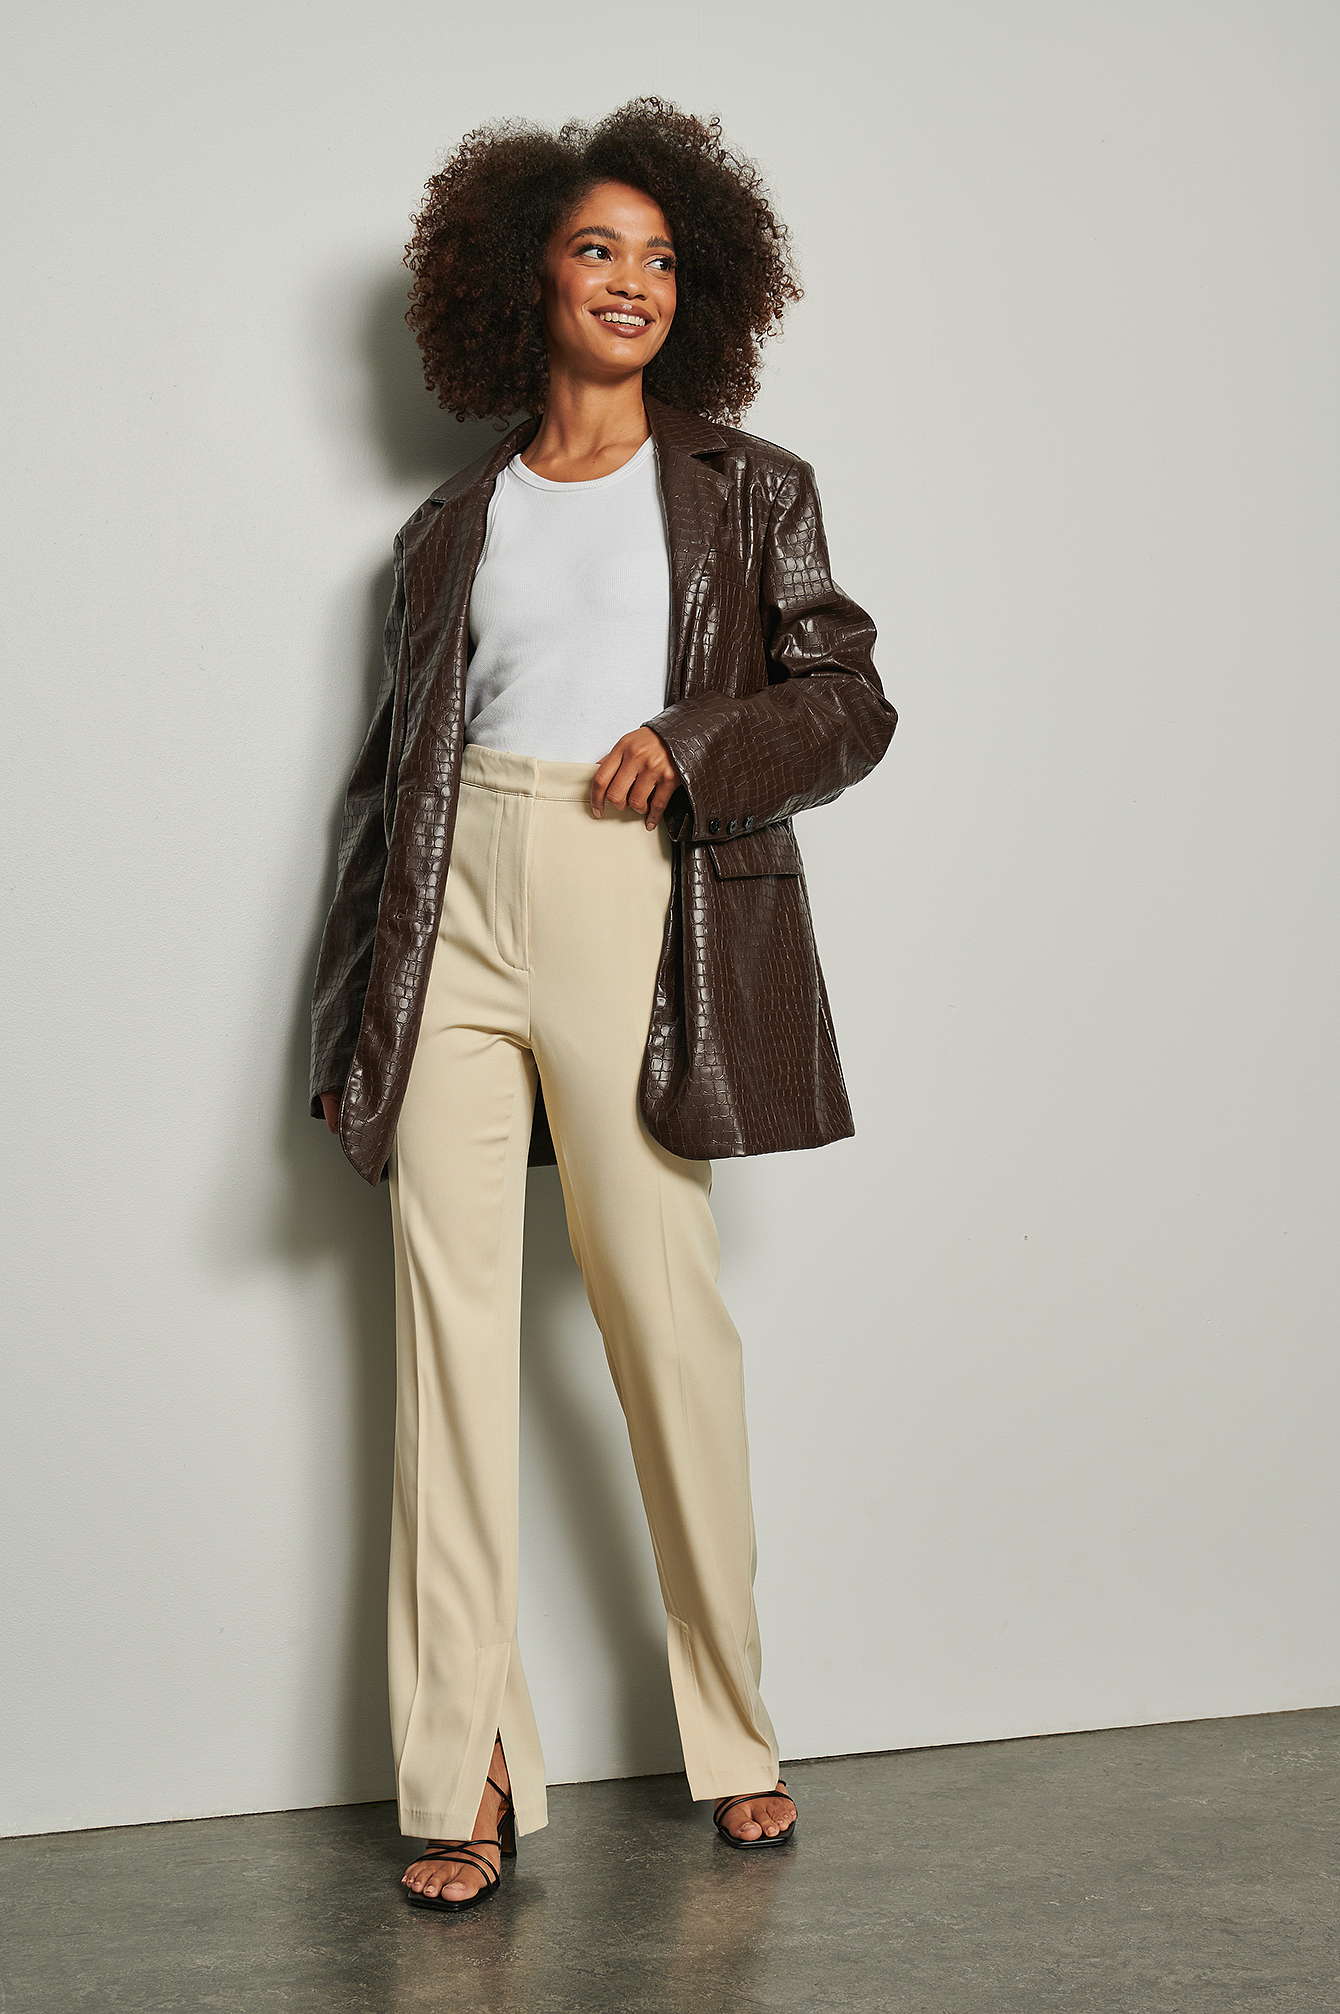 Recycled Soft Tailored Side Slit Pants Outfit.